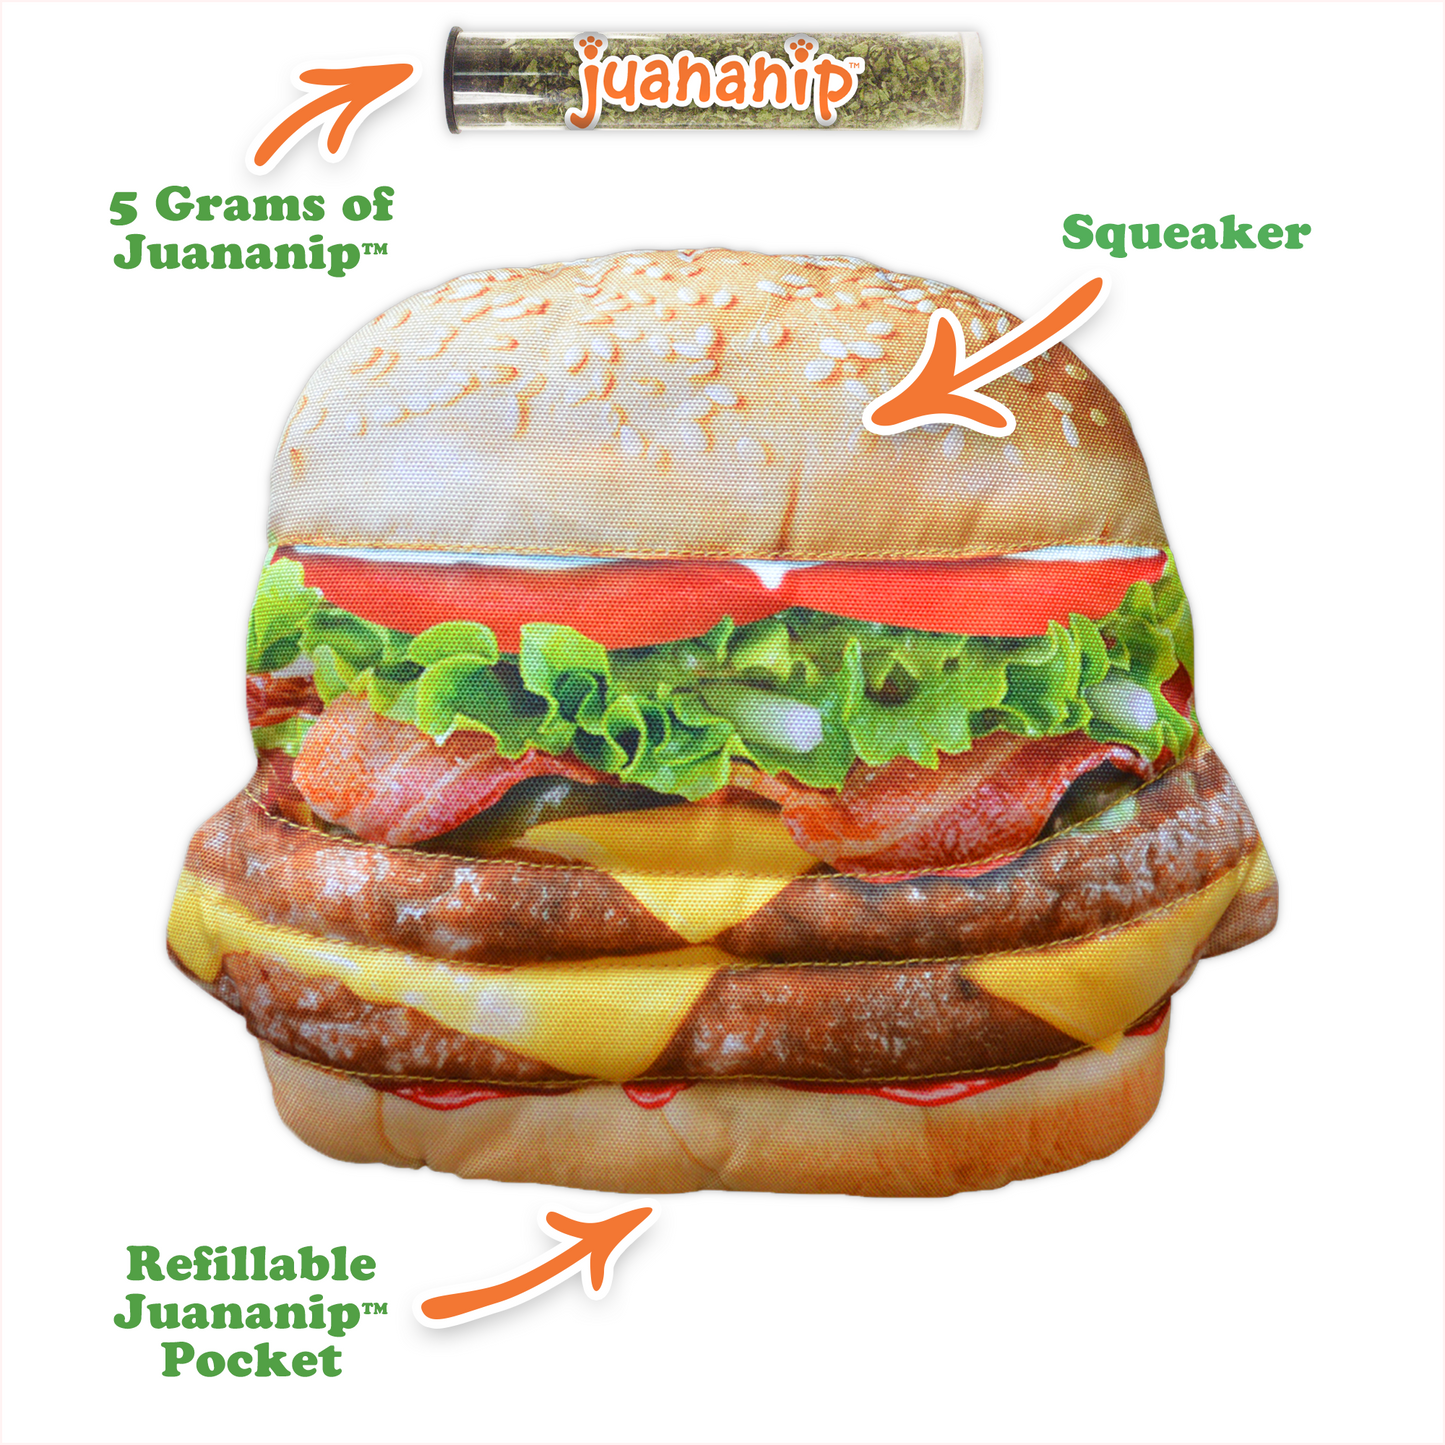 Get The Munchies Refillable Cheeseburger Toy